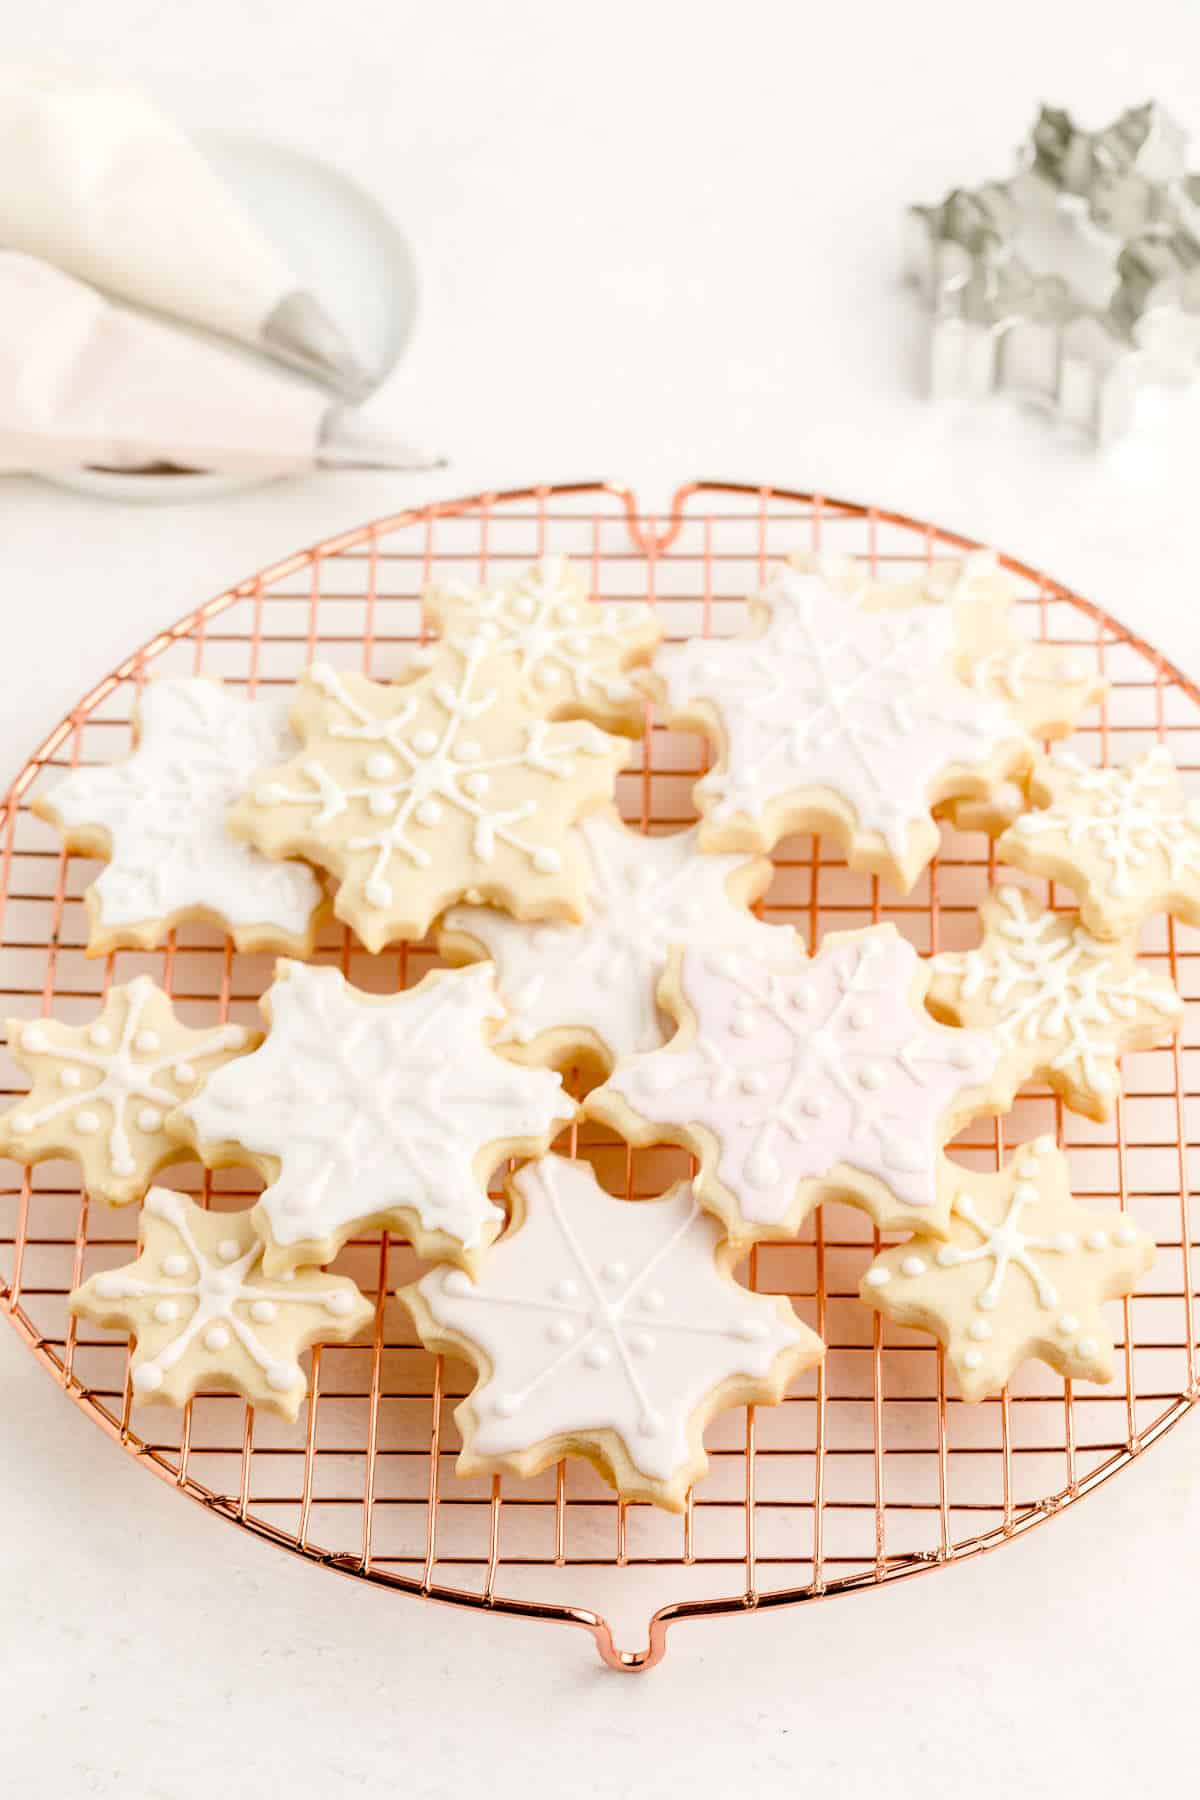 Snowflake-shaped sugar cookies decorated with vegan royal icing and sitting on a drying rack.